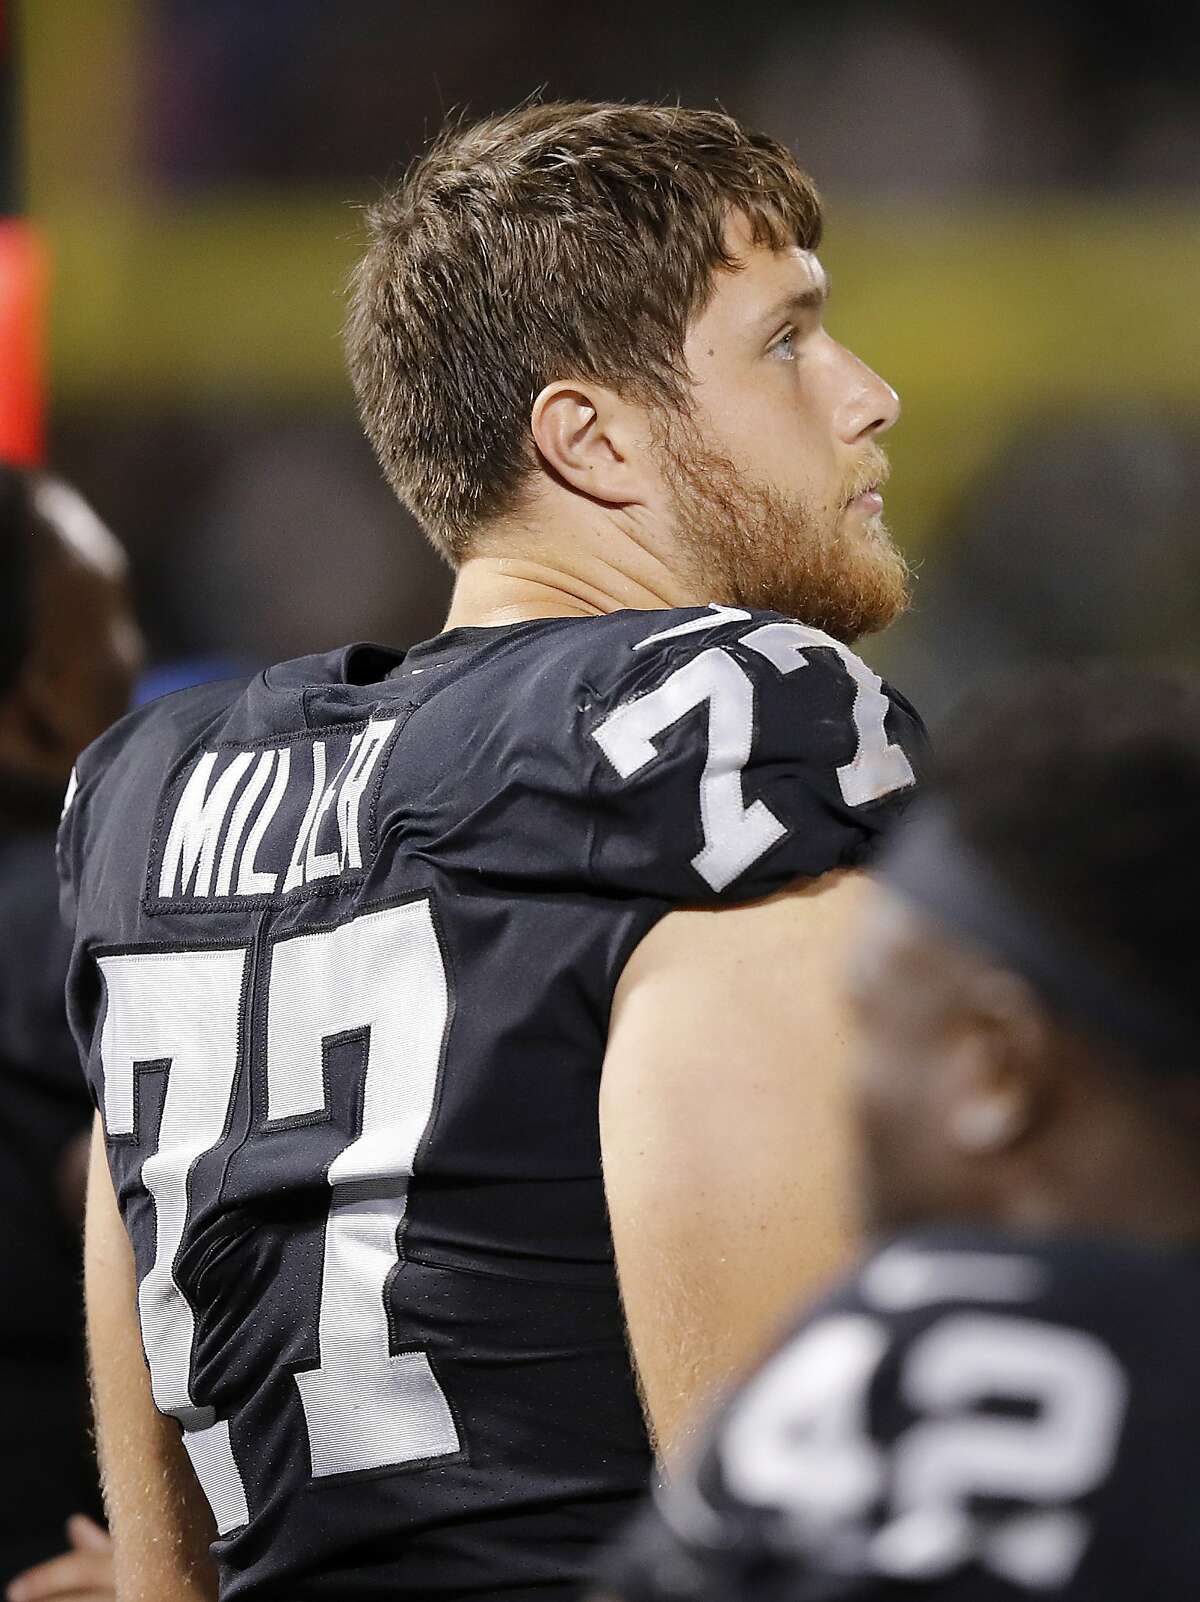 Oakland Raiders offensive tackle Kolton Miller (77) during the second half of an NFL preseason football game against the Detroit Lions in Oakland, Calif., Friday, Aug. 10, 2018. (AP Photo/John Hefti)